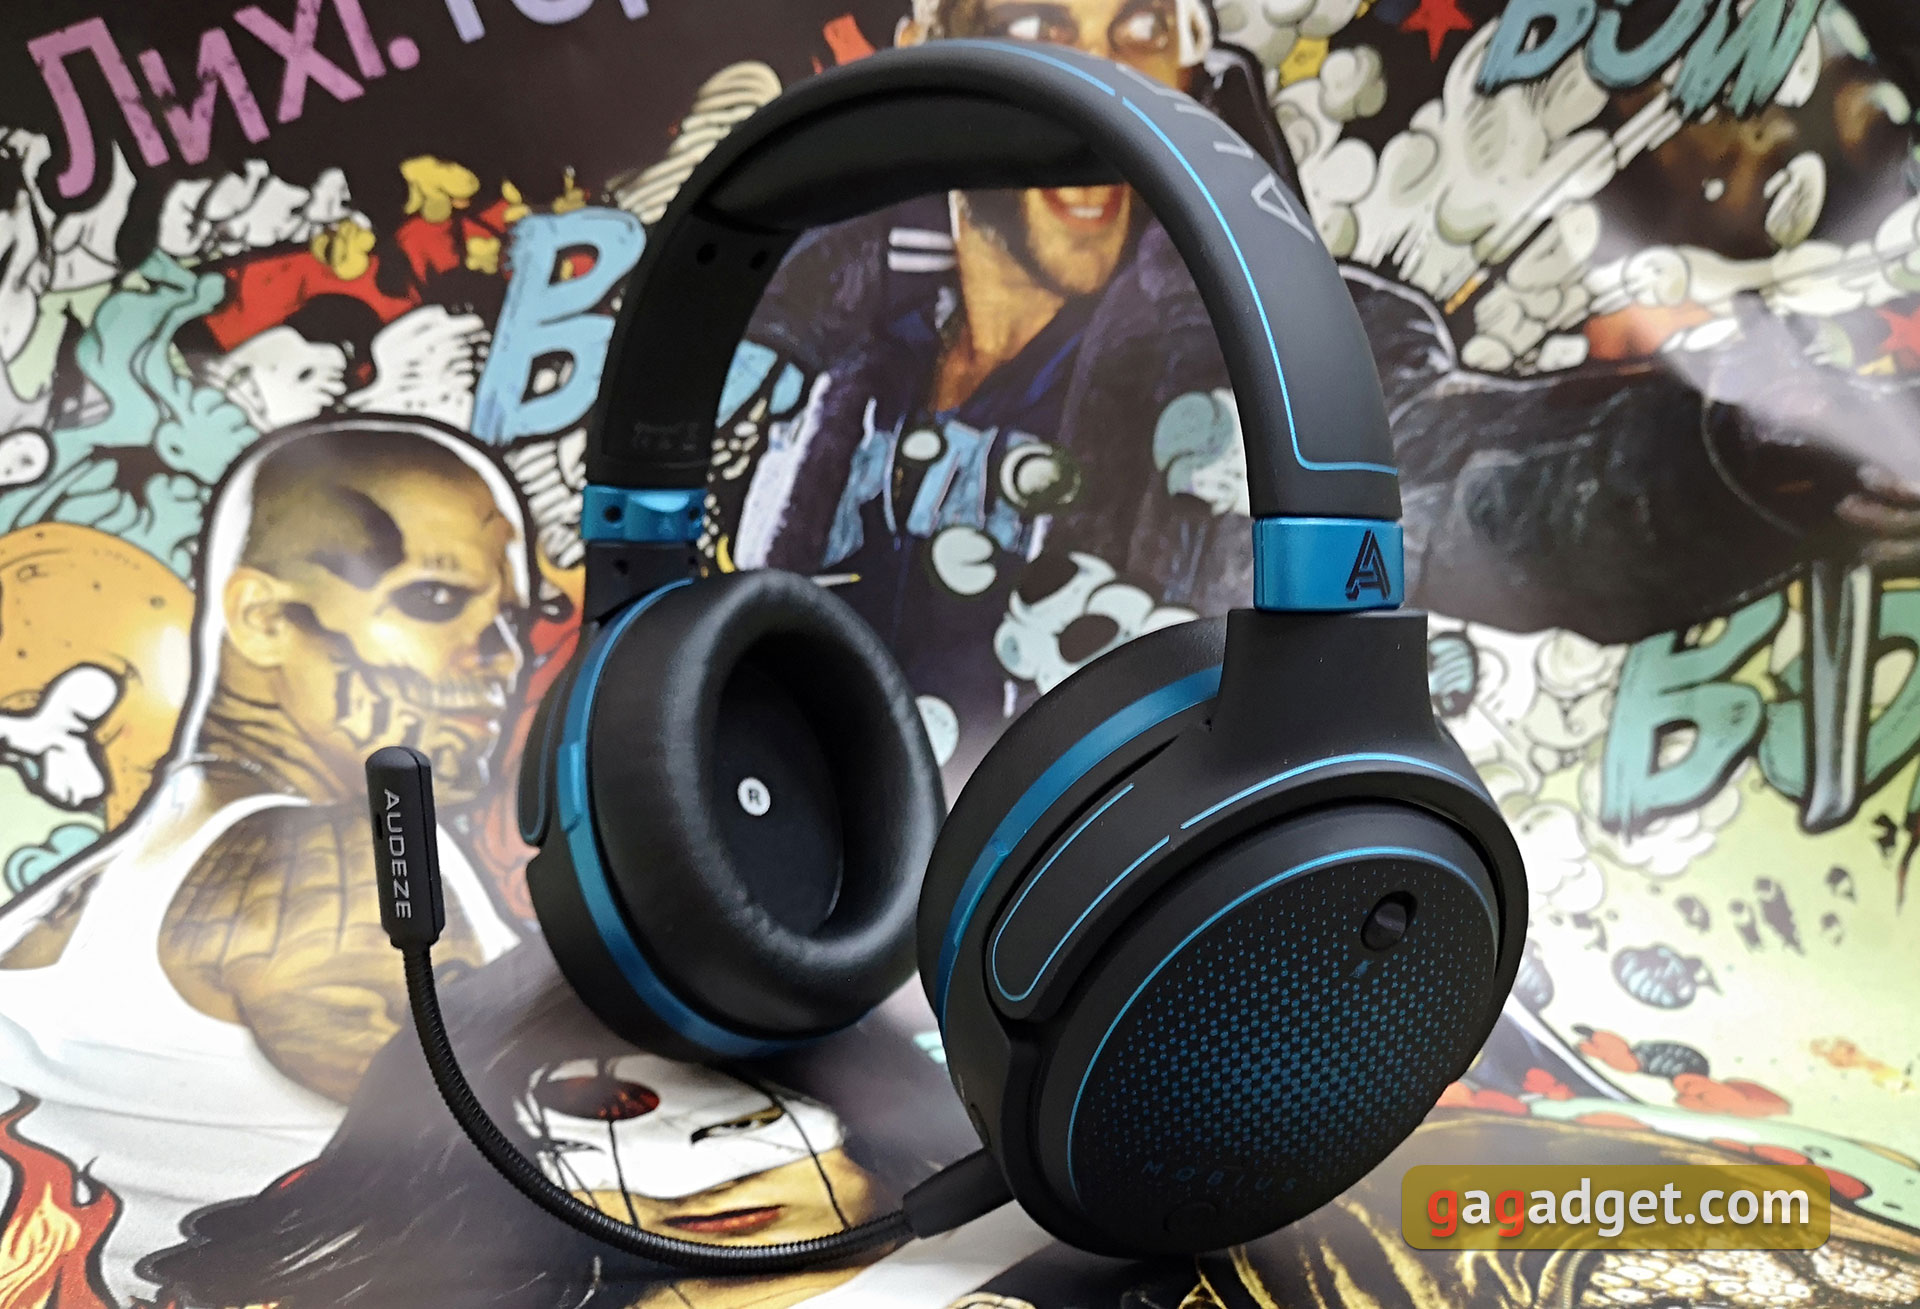 Audeze Mobius review: planar magnetic gaming headphones with 3D sound and motion tracking-2